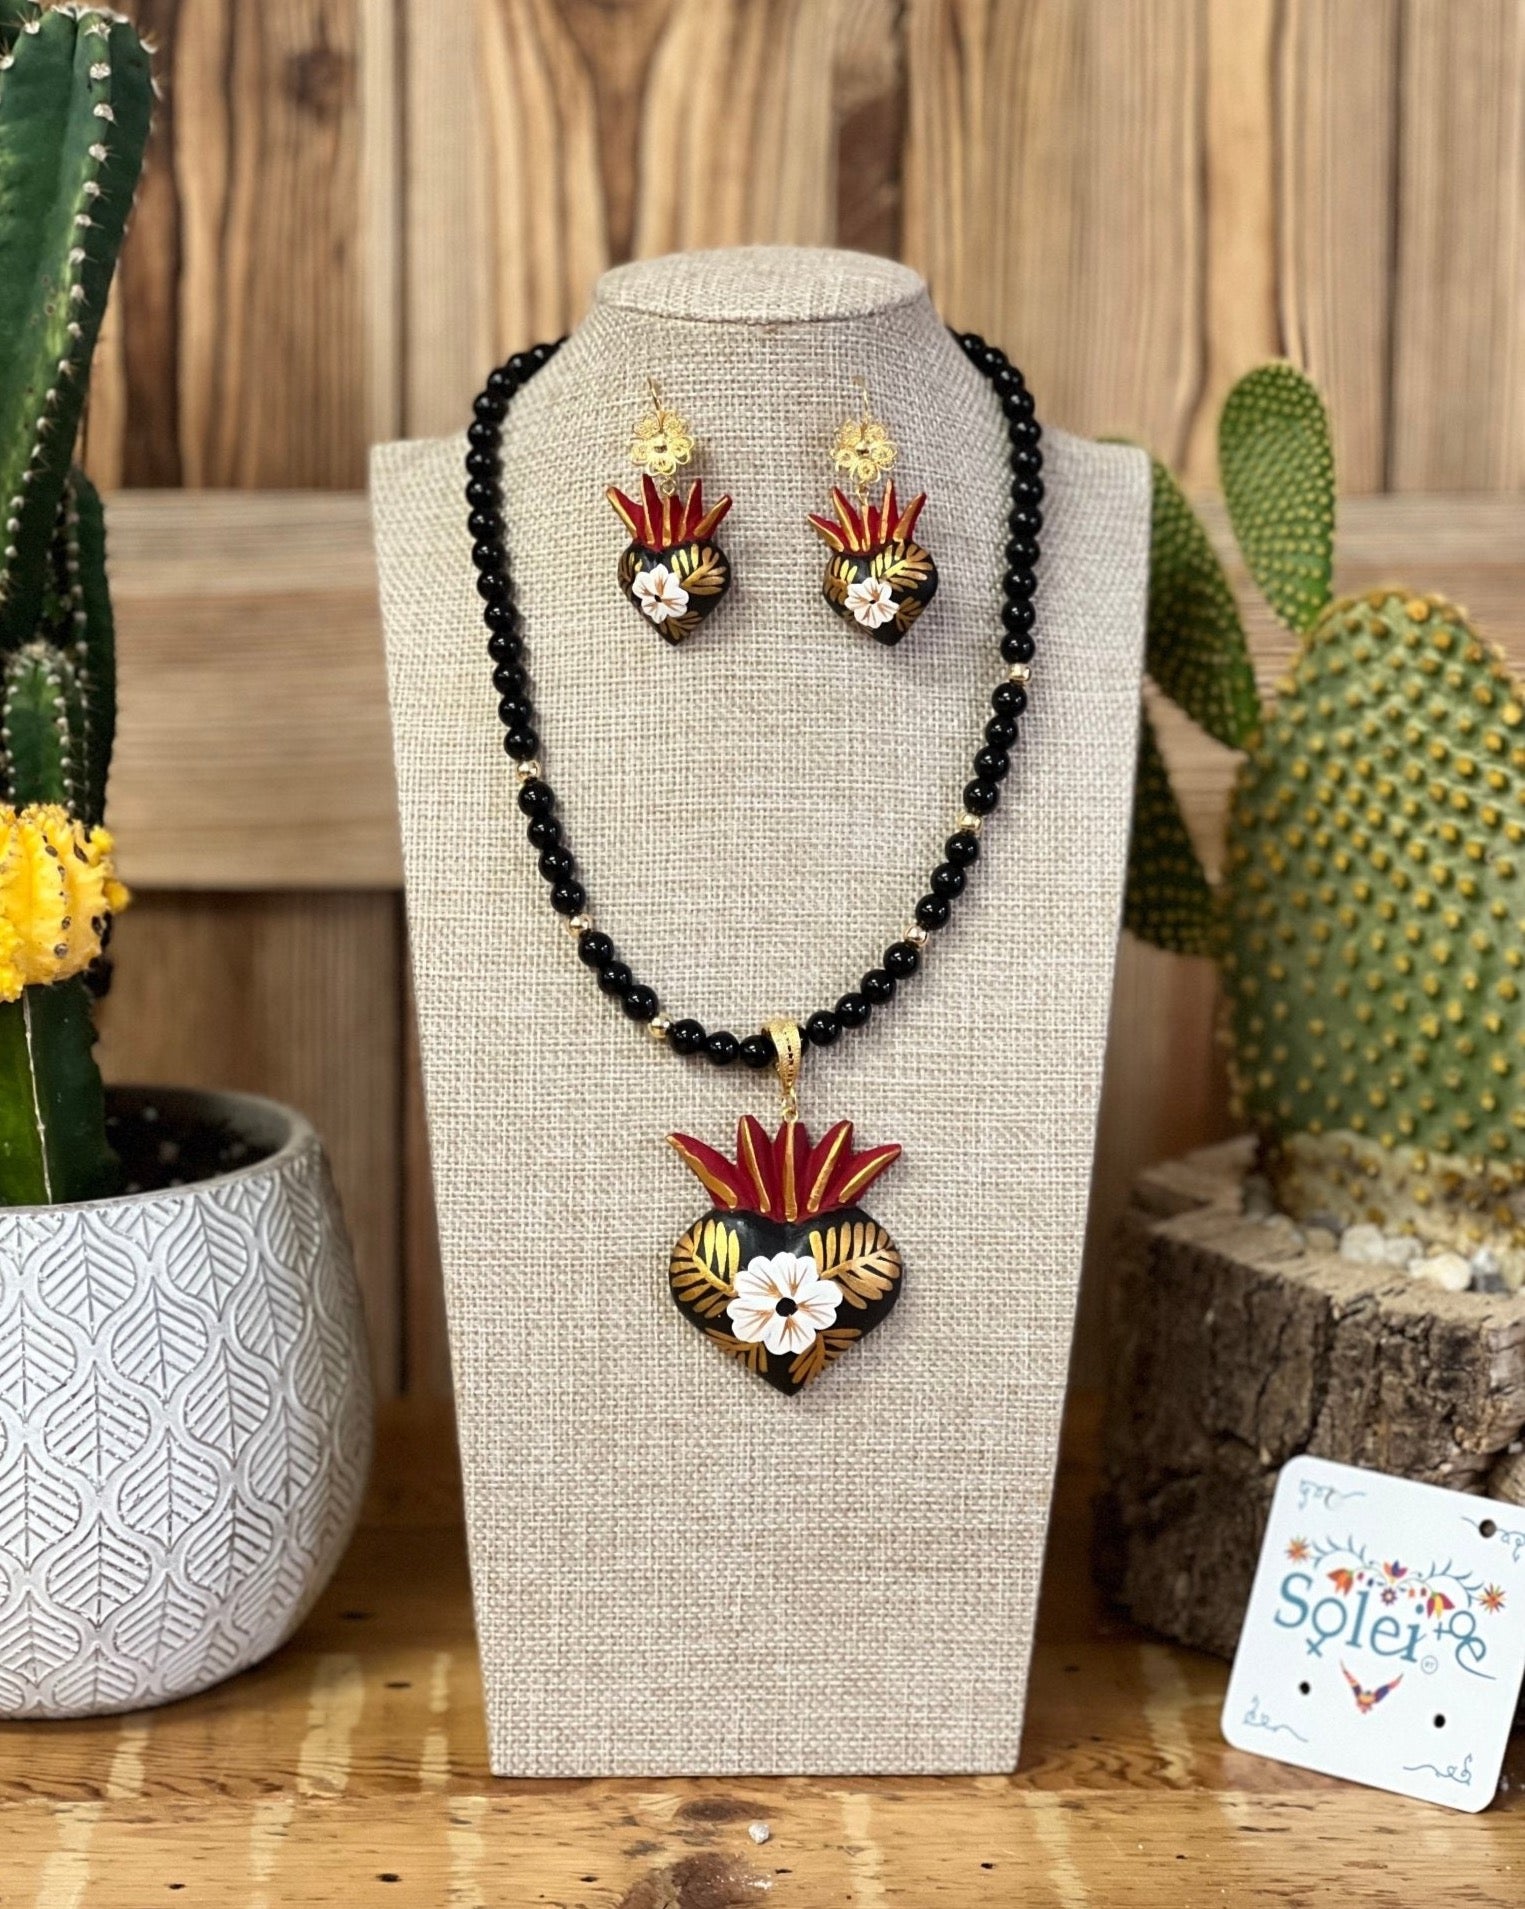 Mexican Hand Painted Heart Earrings and Necklace. Choker Filigrana y Copel. - Solei Store